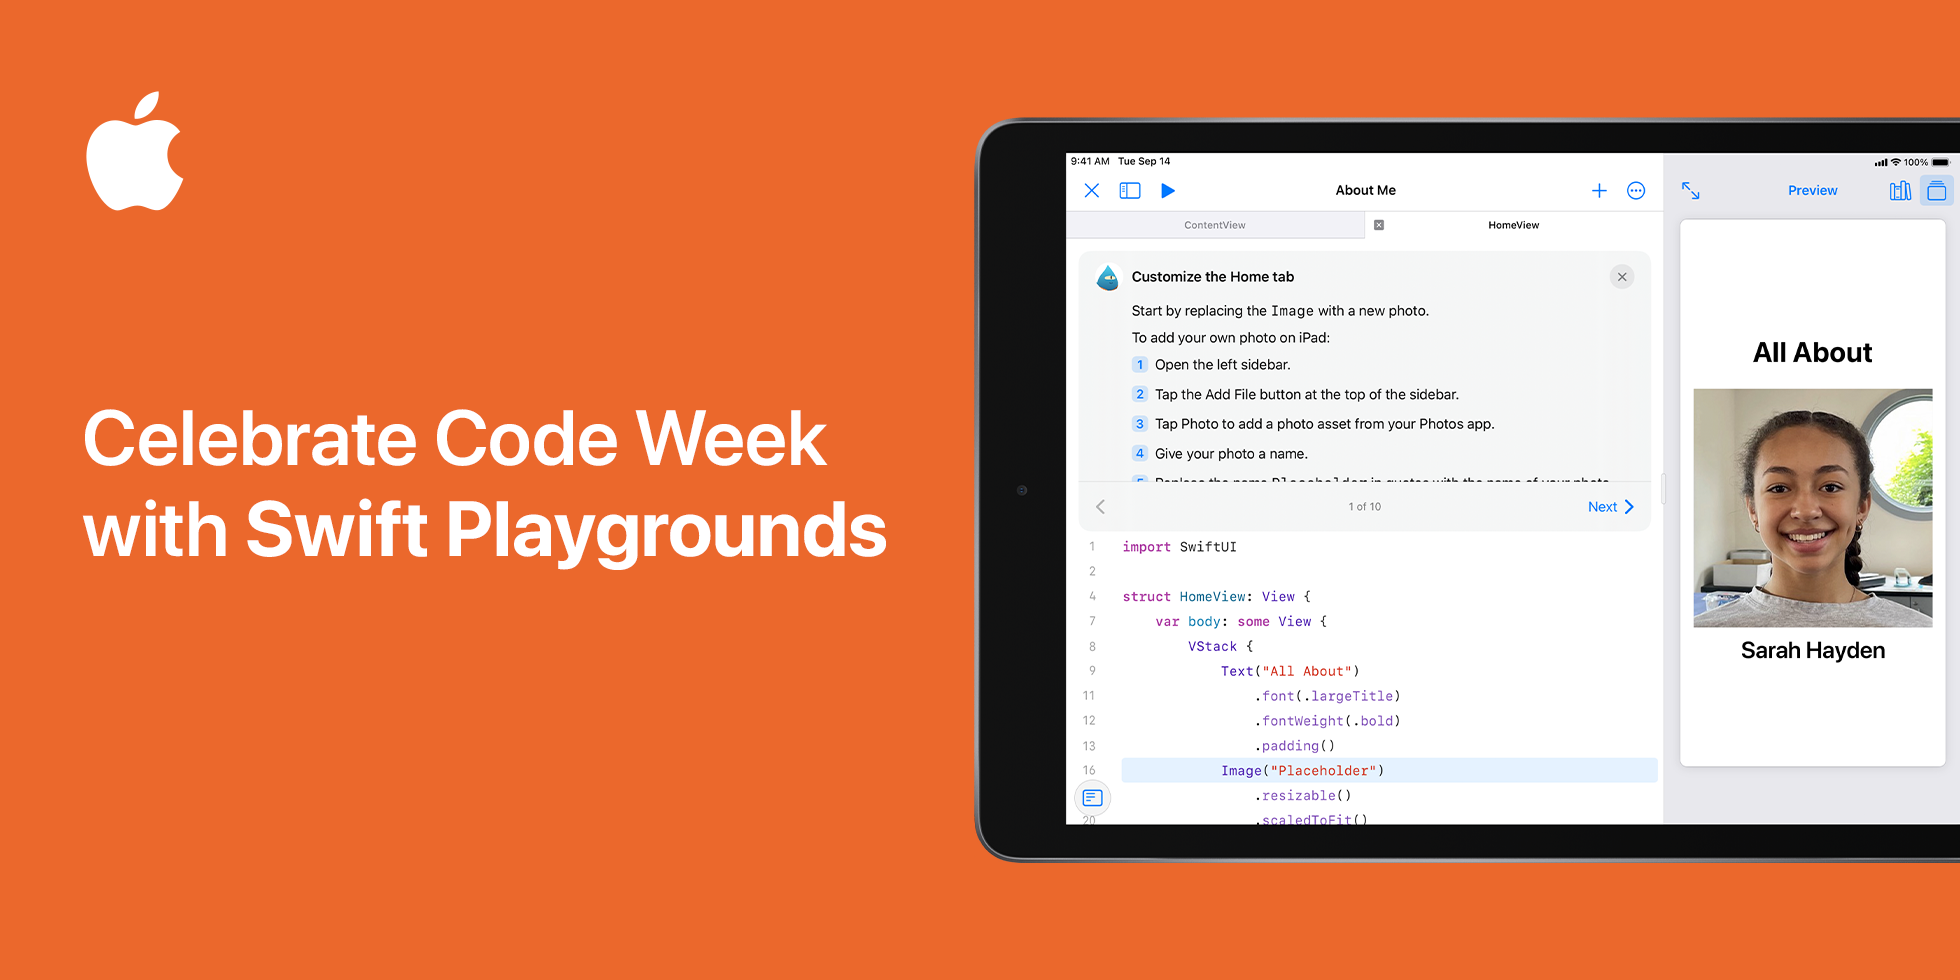 Celebrate Code Week with Swift Playgrounds banner with Swift Playground code on iPad.